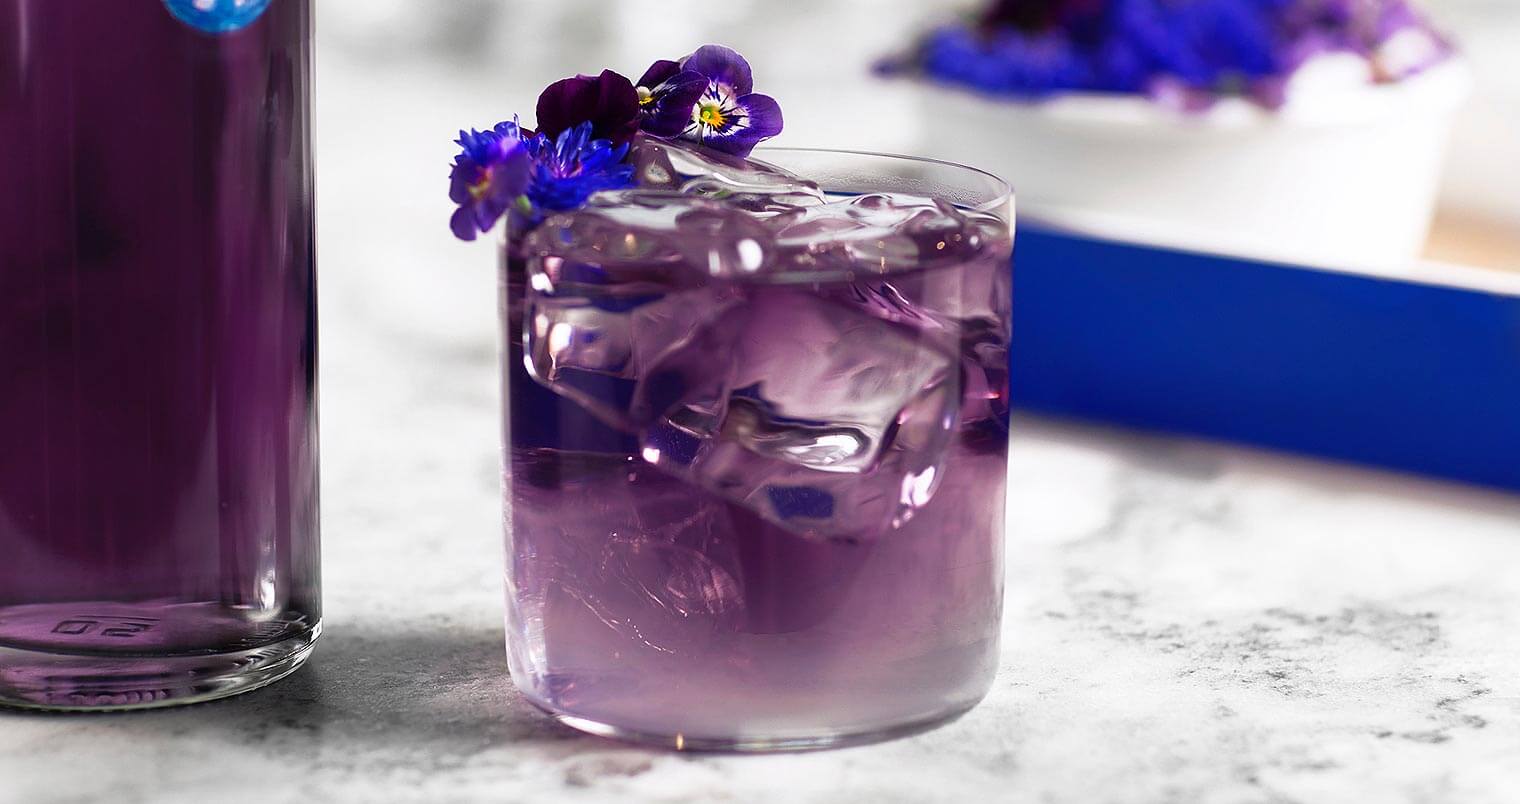 The Ultraviolet cocktail, featured image